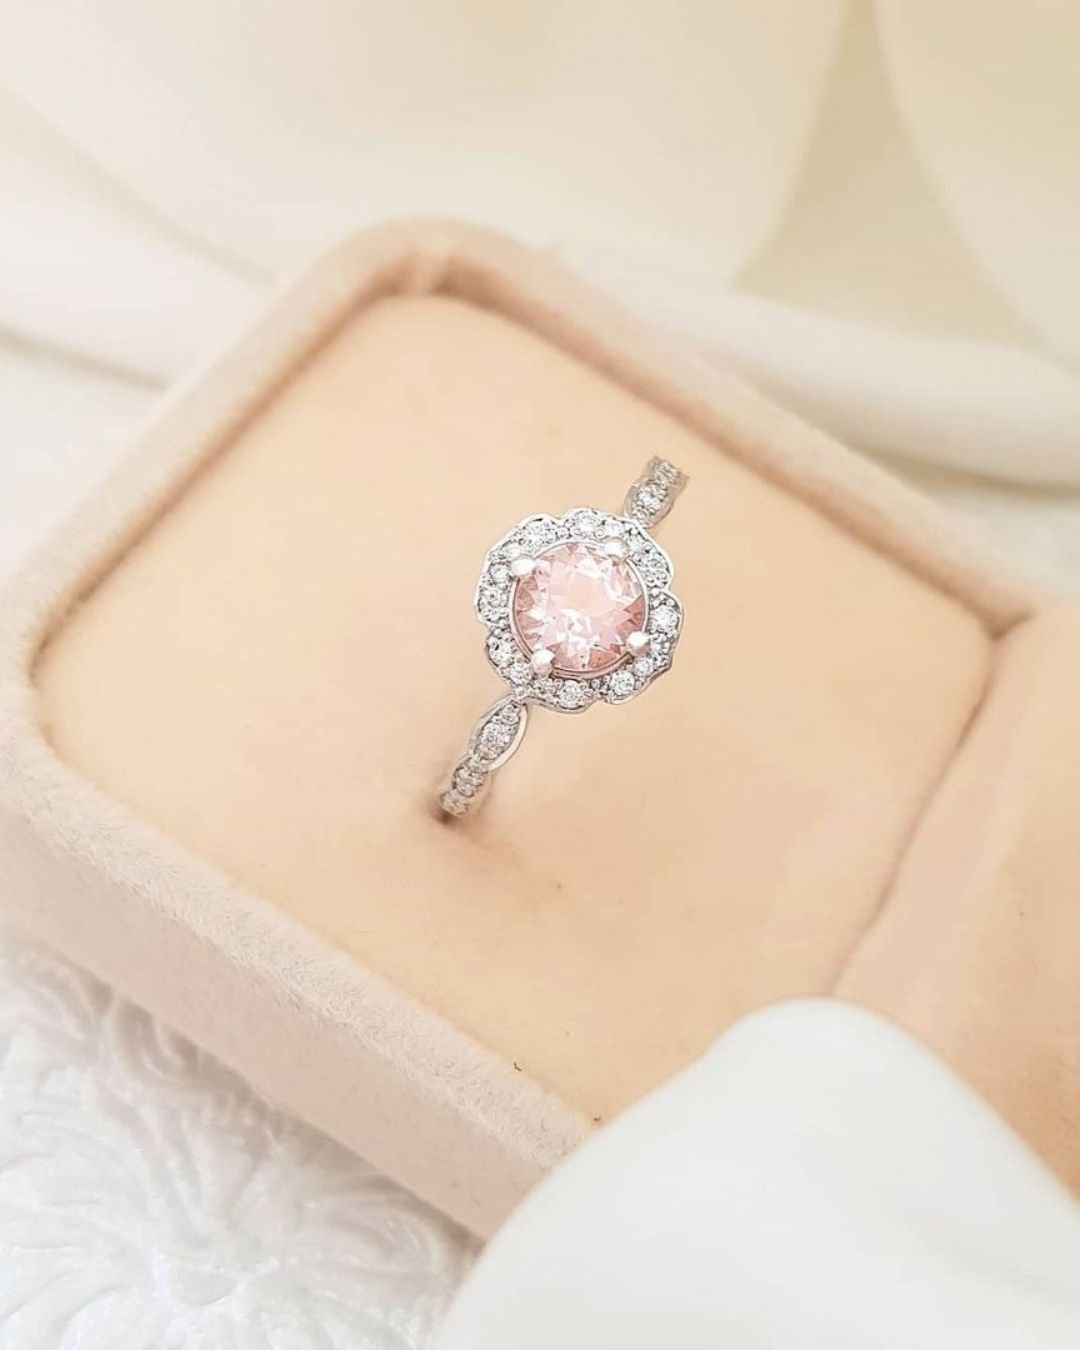 morganite engagement rings with amazing details5